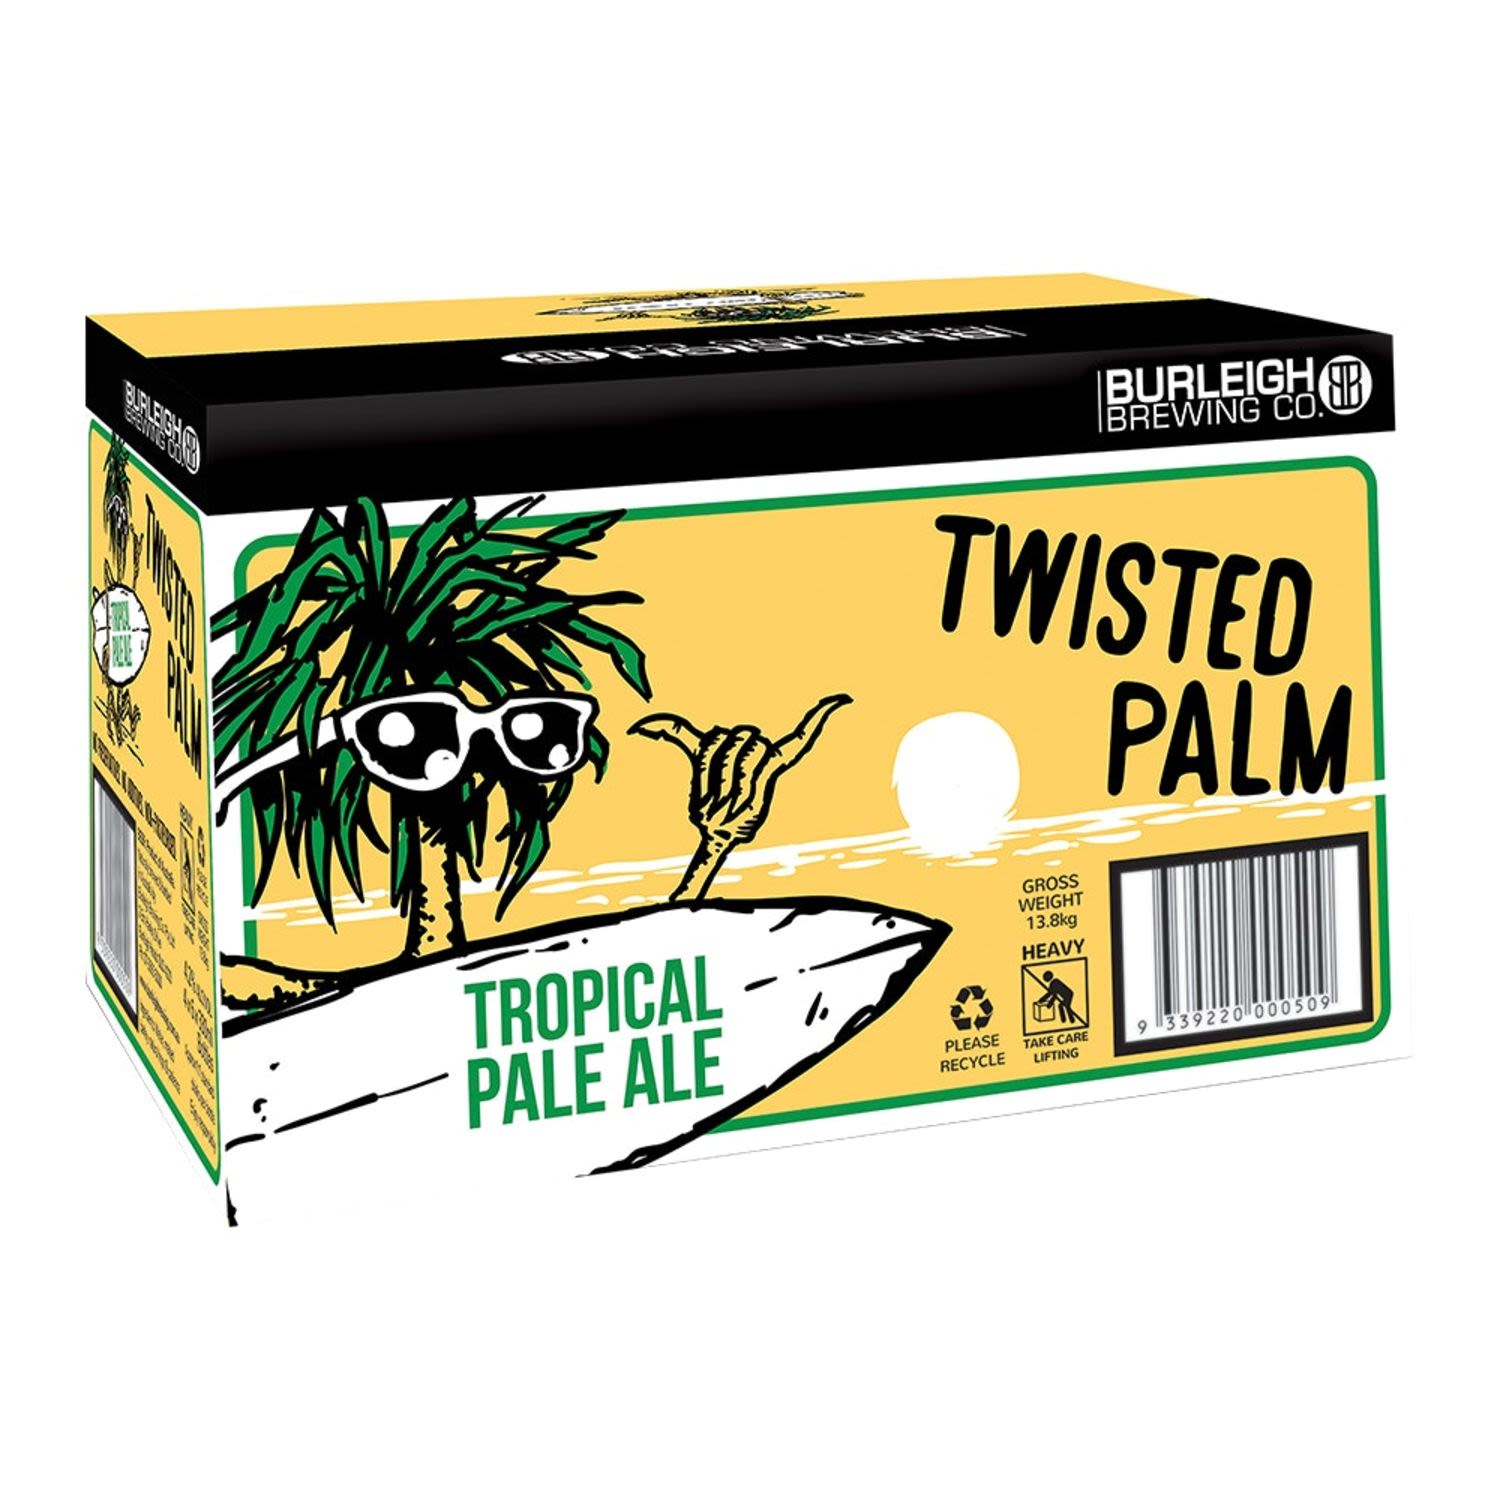 Burleigh Brewing Co. Twisted Palm Pale Ale Bottle 330mL 24 Pack